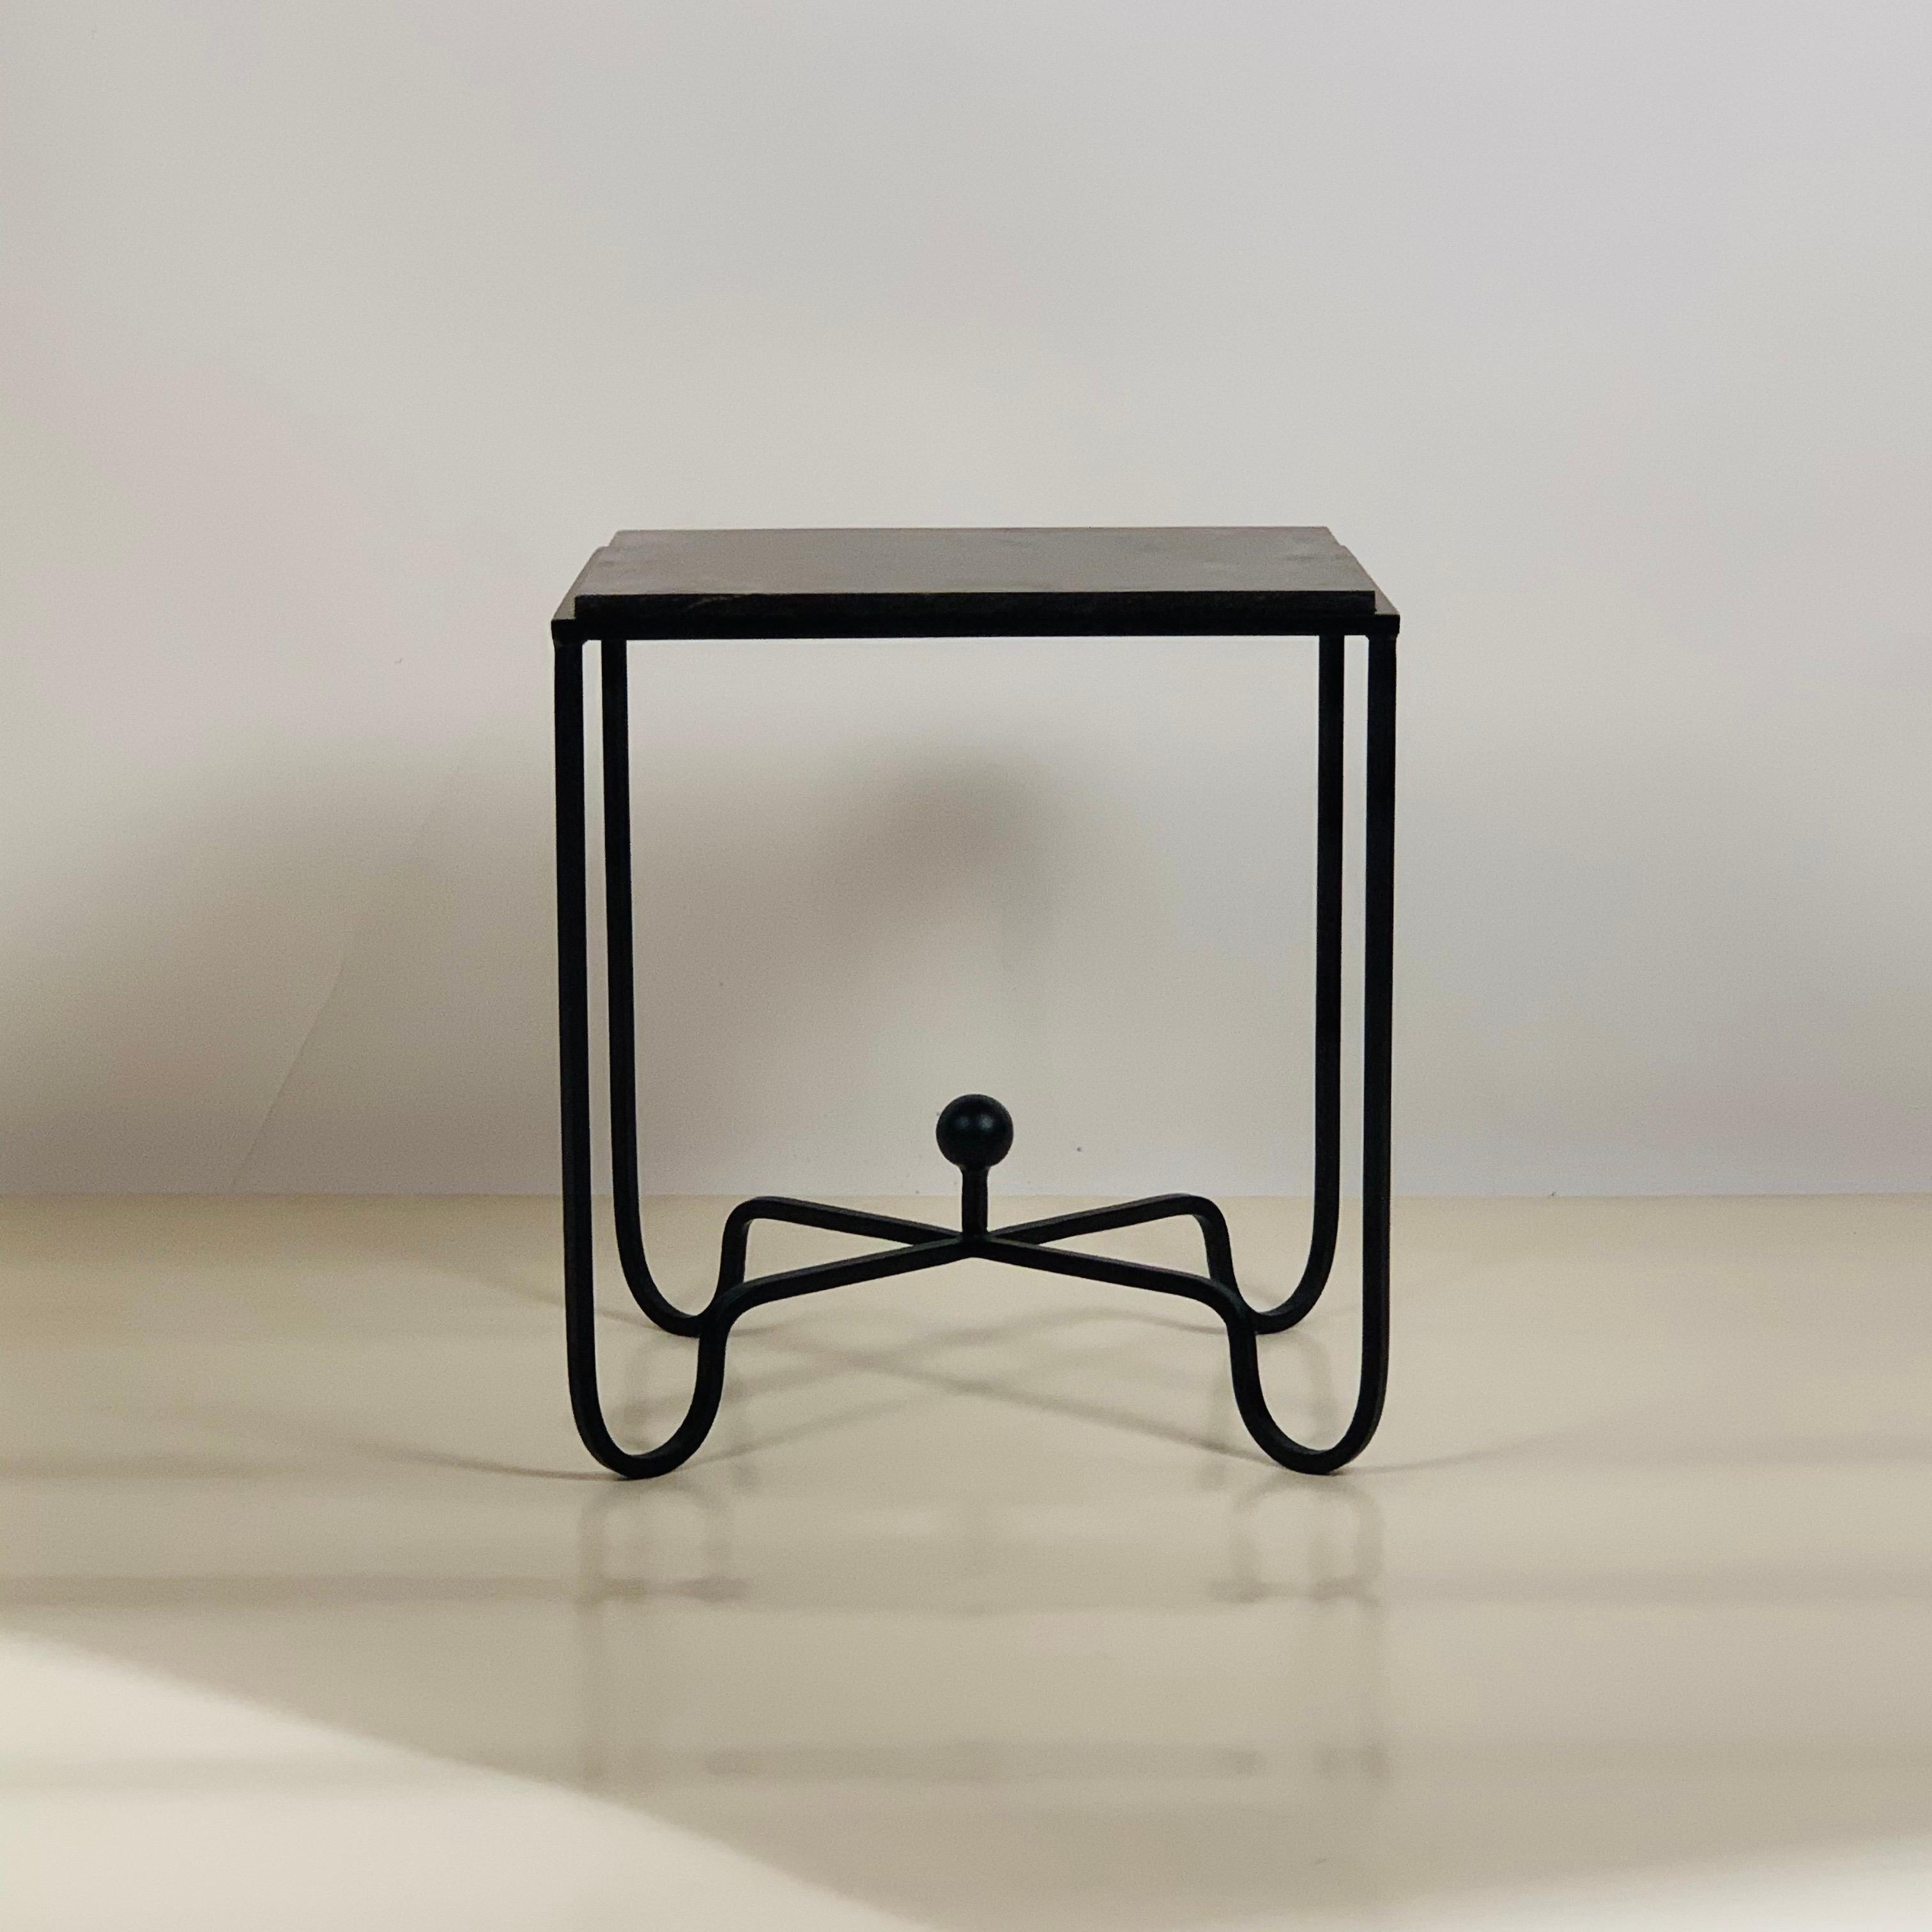 Sculptural blackened steel frame fitted with a gorgeous black limestone top. Very durable stone surface.

Inspired by the timeless aesthetic of French modern design, this side table from our exclusive Design Frères line is handmade in our Los